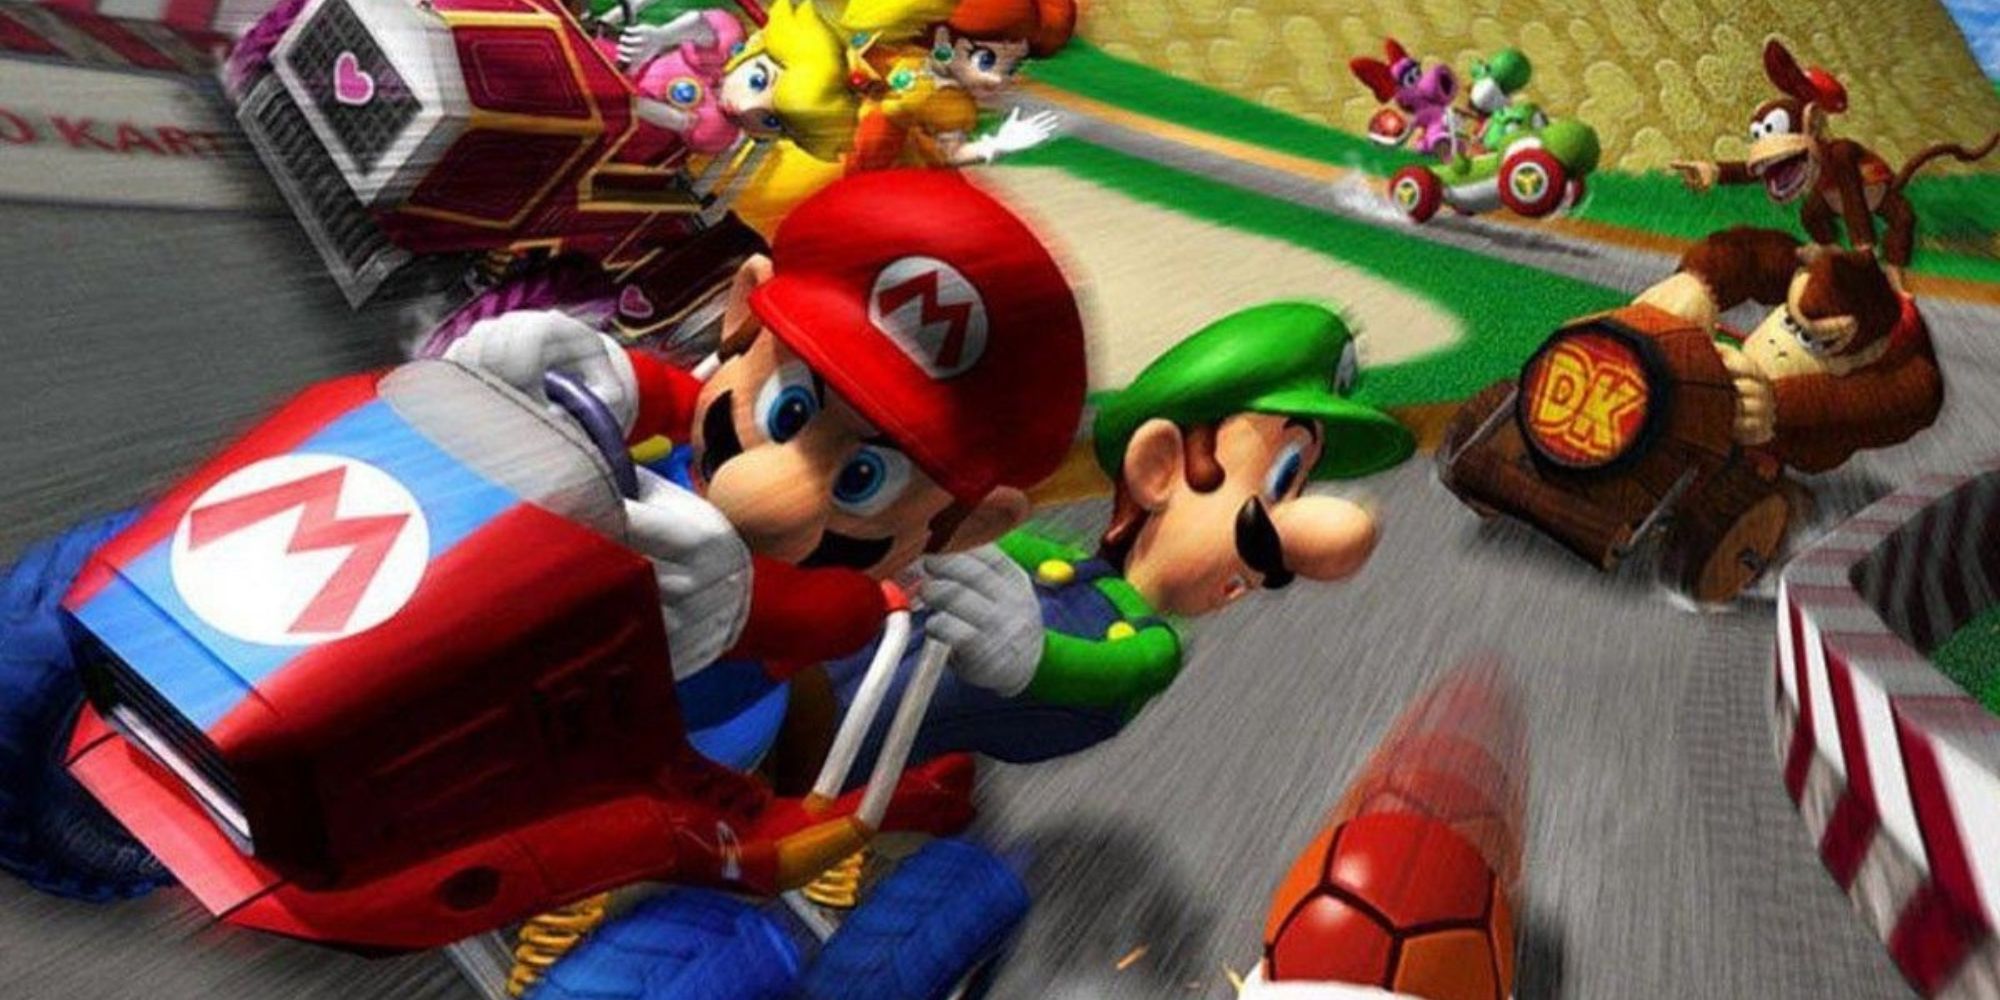 Mario and Luigi lead the race followed by Donkey Kong and Diddy Kong, Yoshi and Birdo, and Peach and Daisy